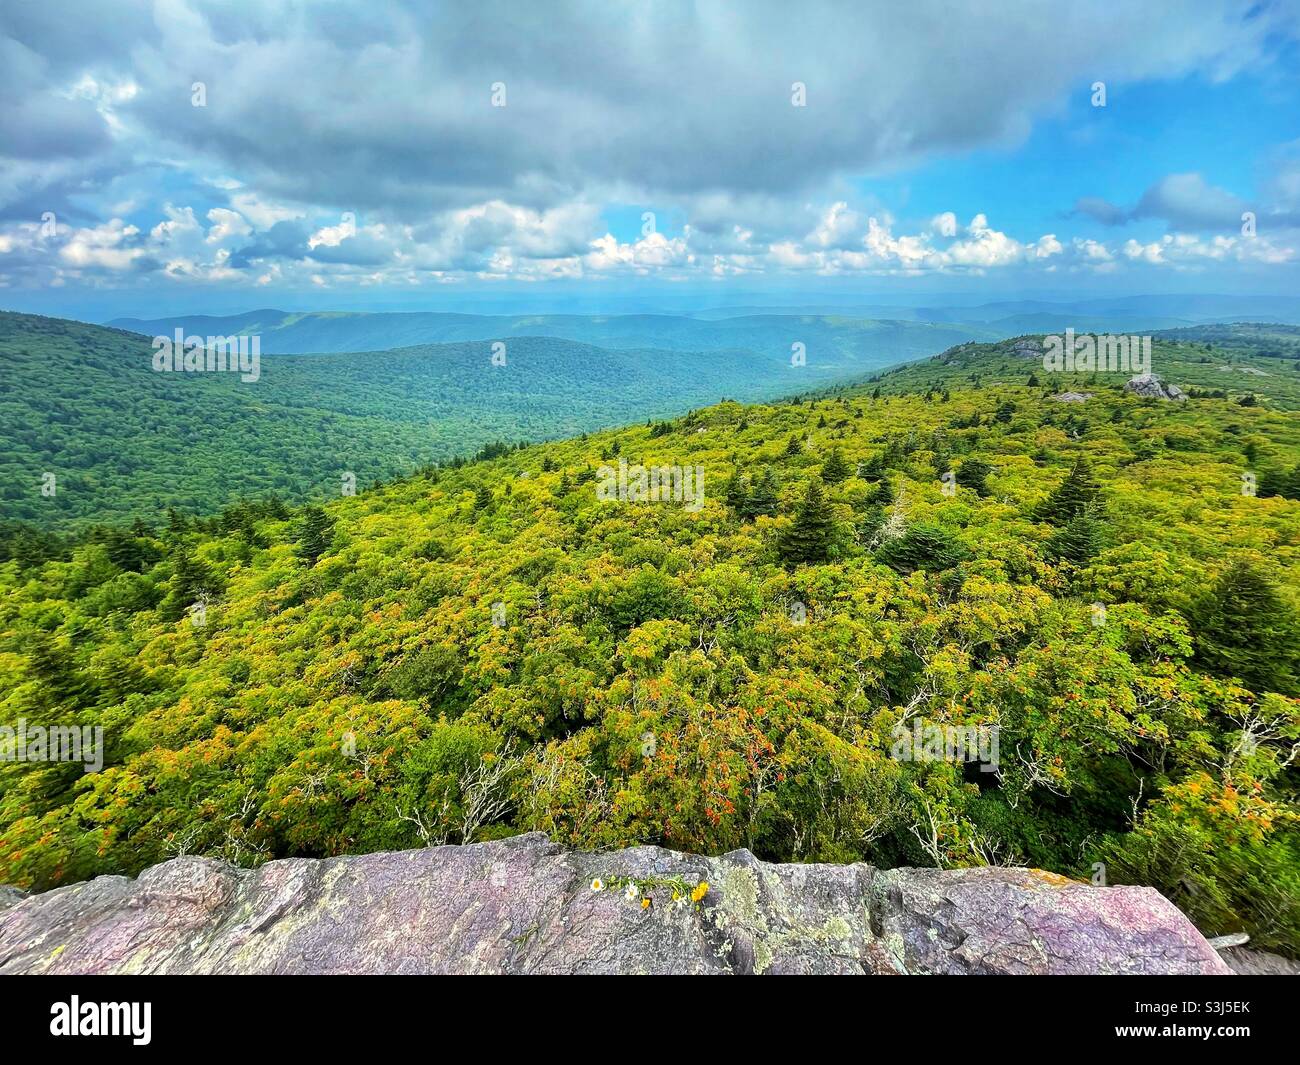 Summertime views along the Appalachian Trail near Mt Rogers and Grayson Highlands in southwest Virginia. Stock Photo